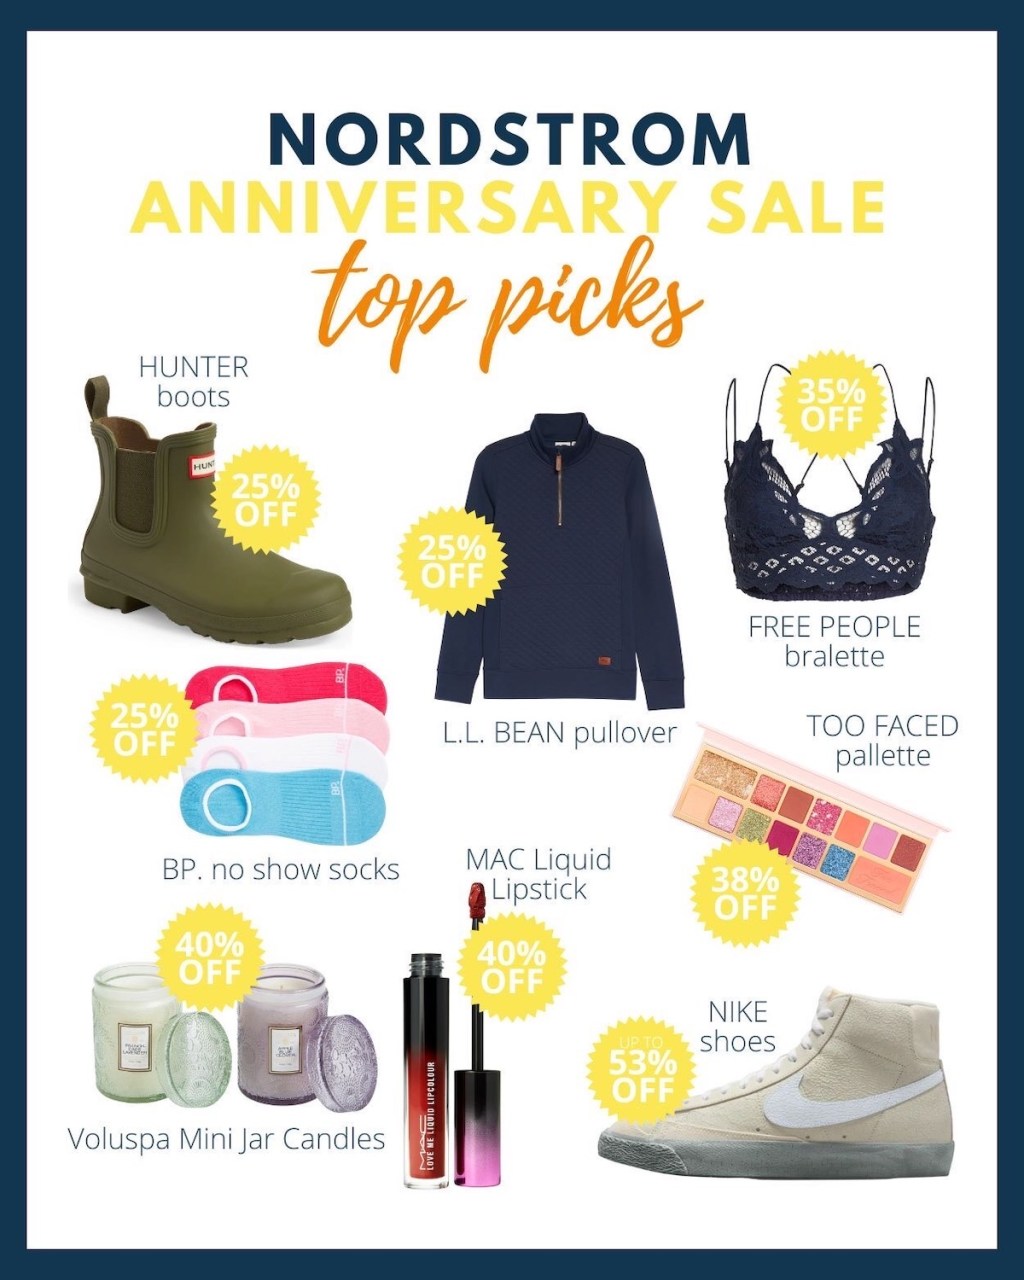 graphic of nordstrom anniversary sale shoes clothing and cosmetics with pricing